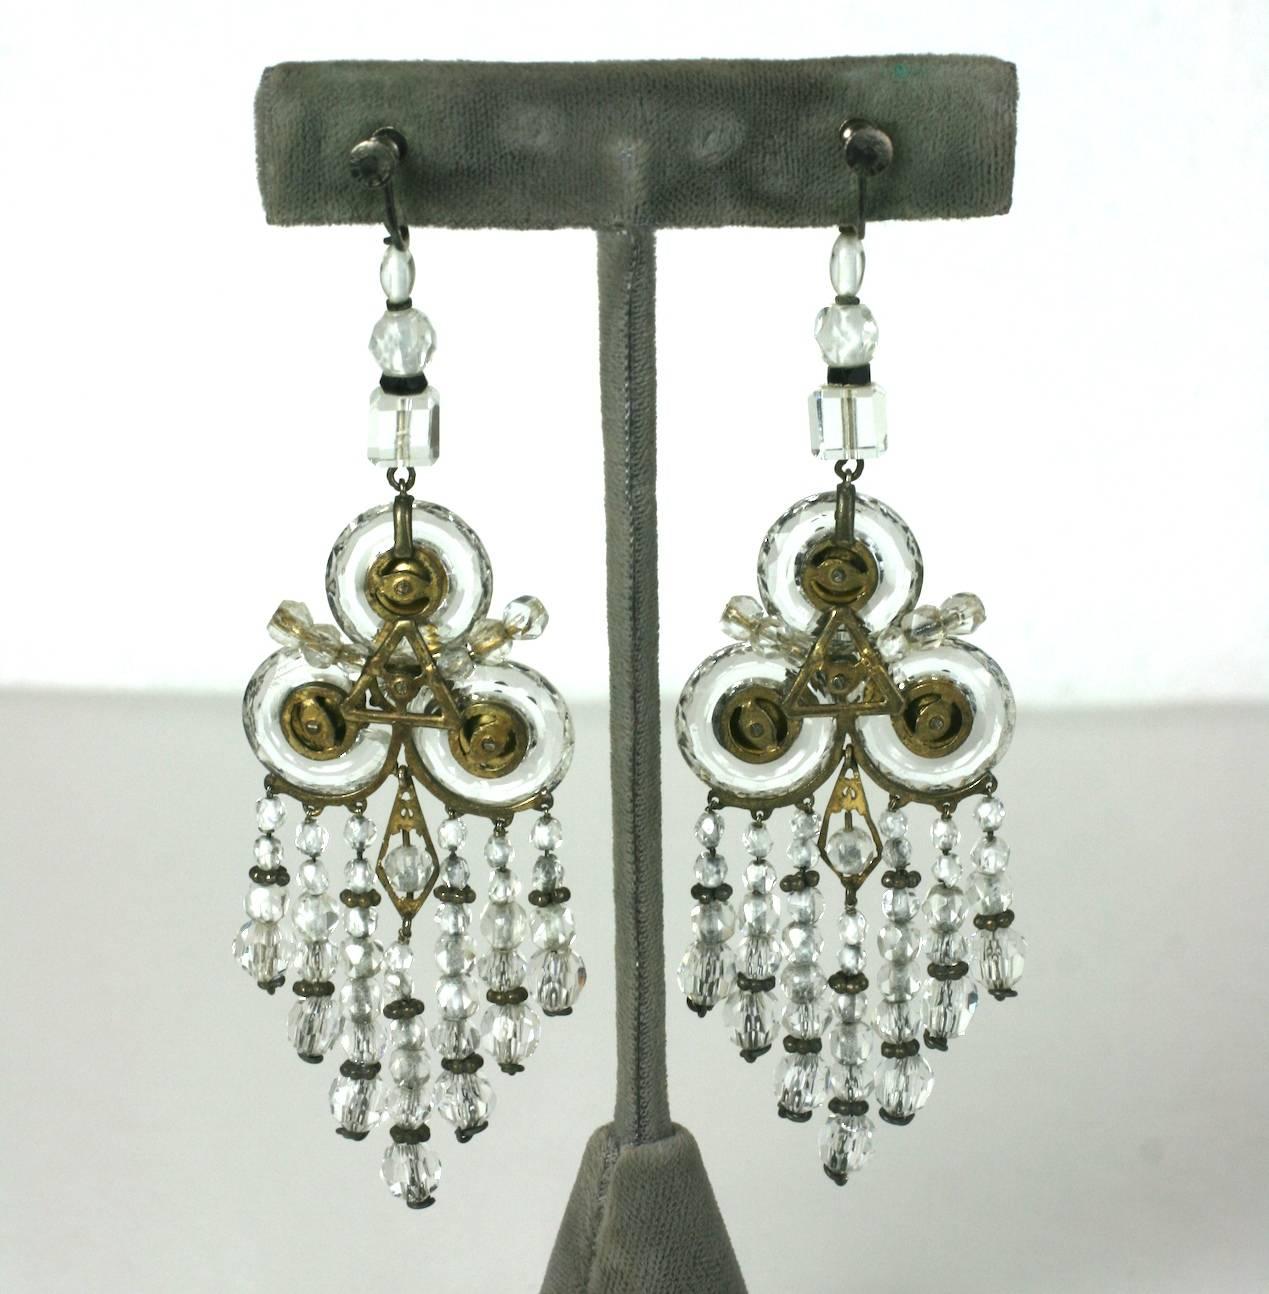 Wonderful Chinese Art Deco Rock Crystal Fringe Earrings In Excellent Condition For Sale In New York, NY